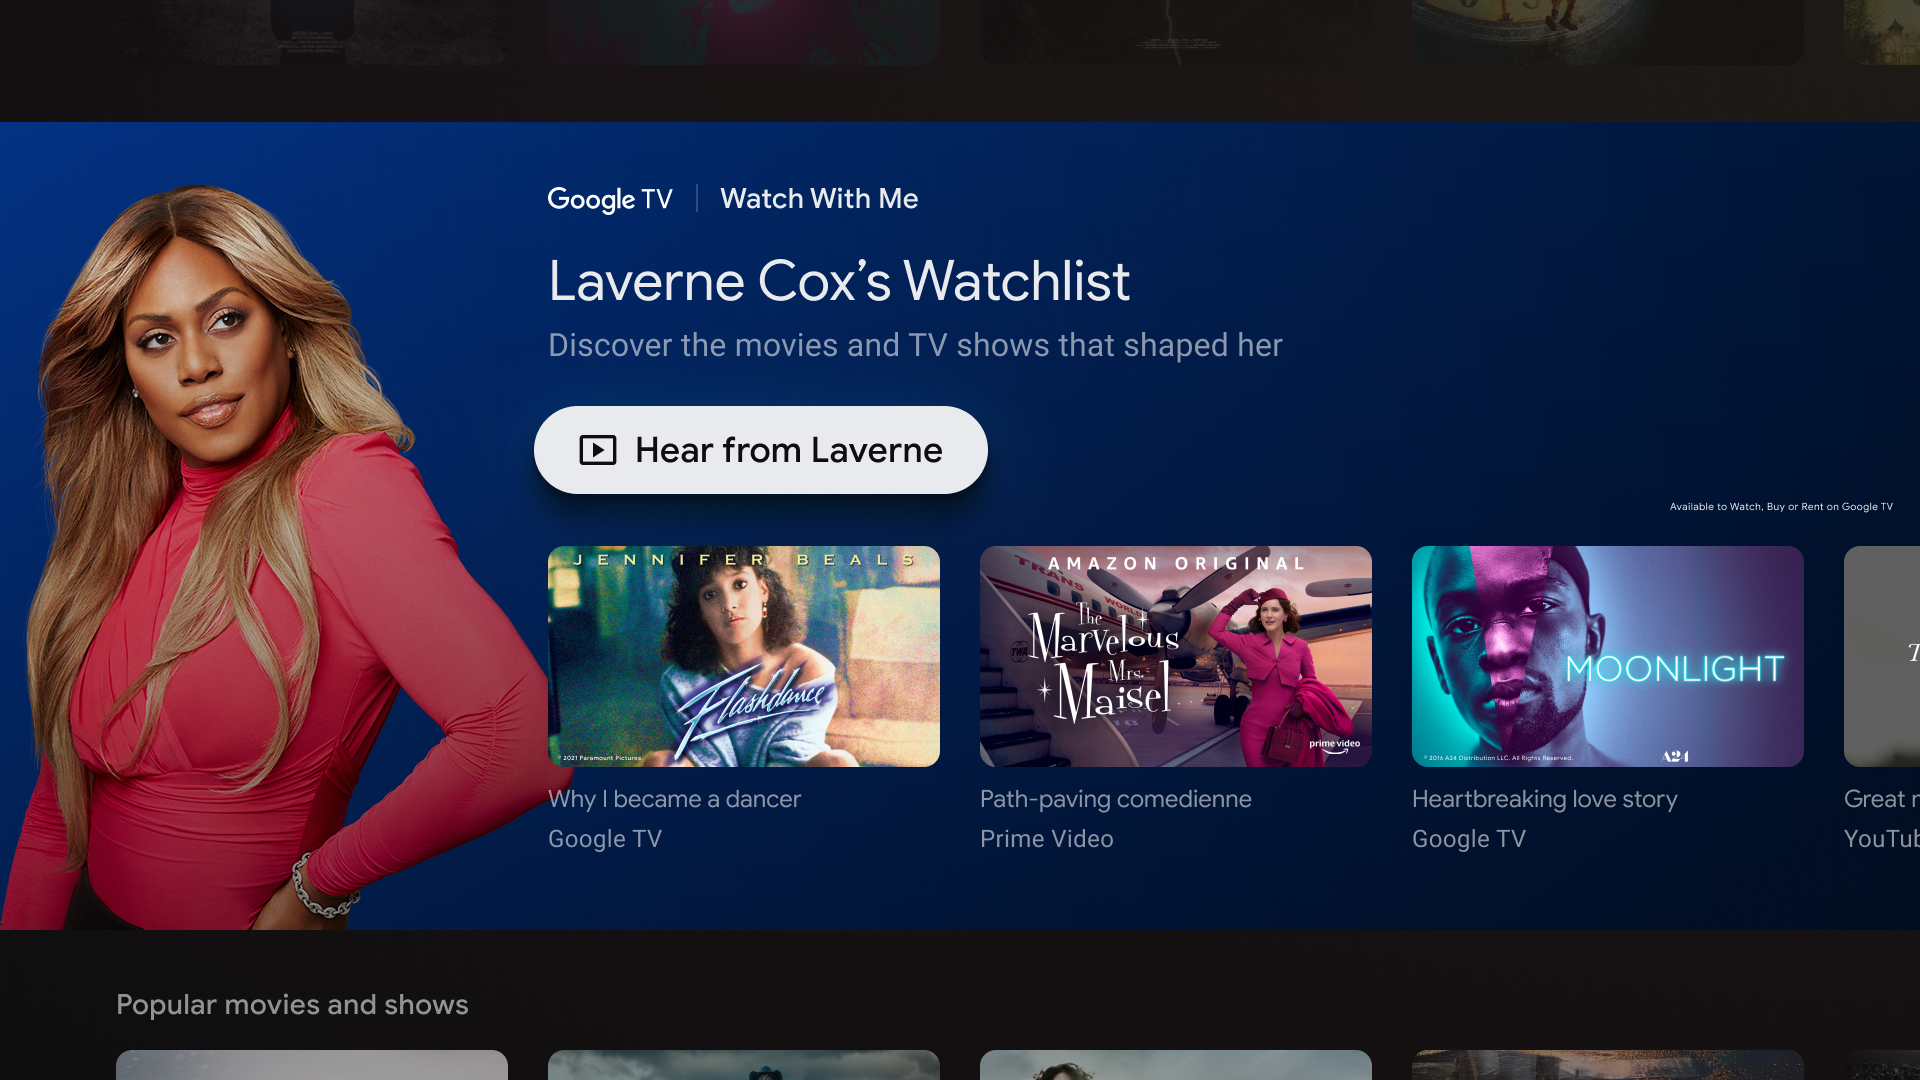 A screenshot showing the Watch With Me series in the new For You tab on Google TV.